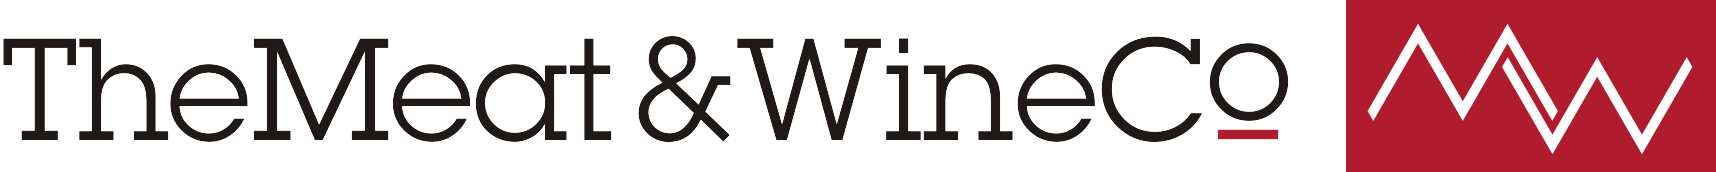 The meat and wine logo